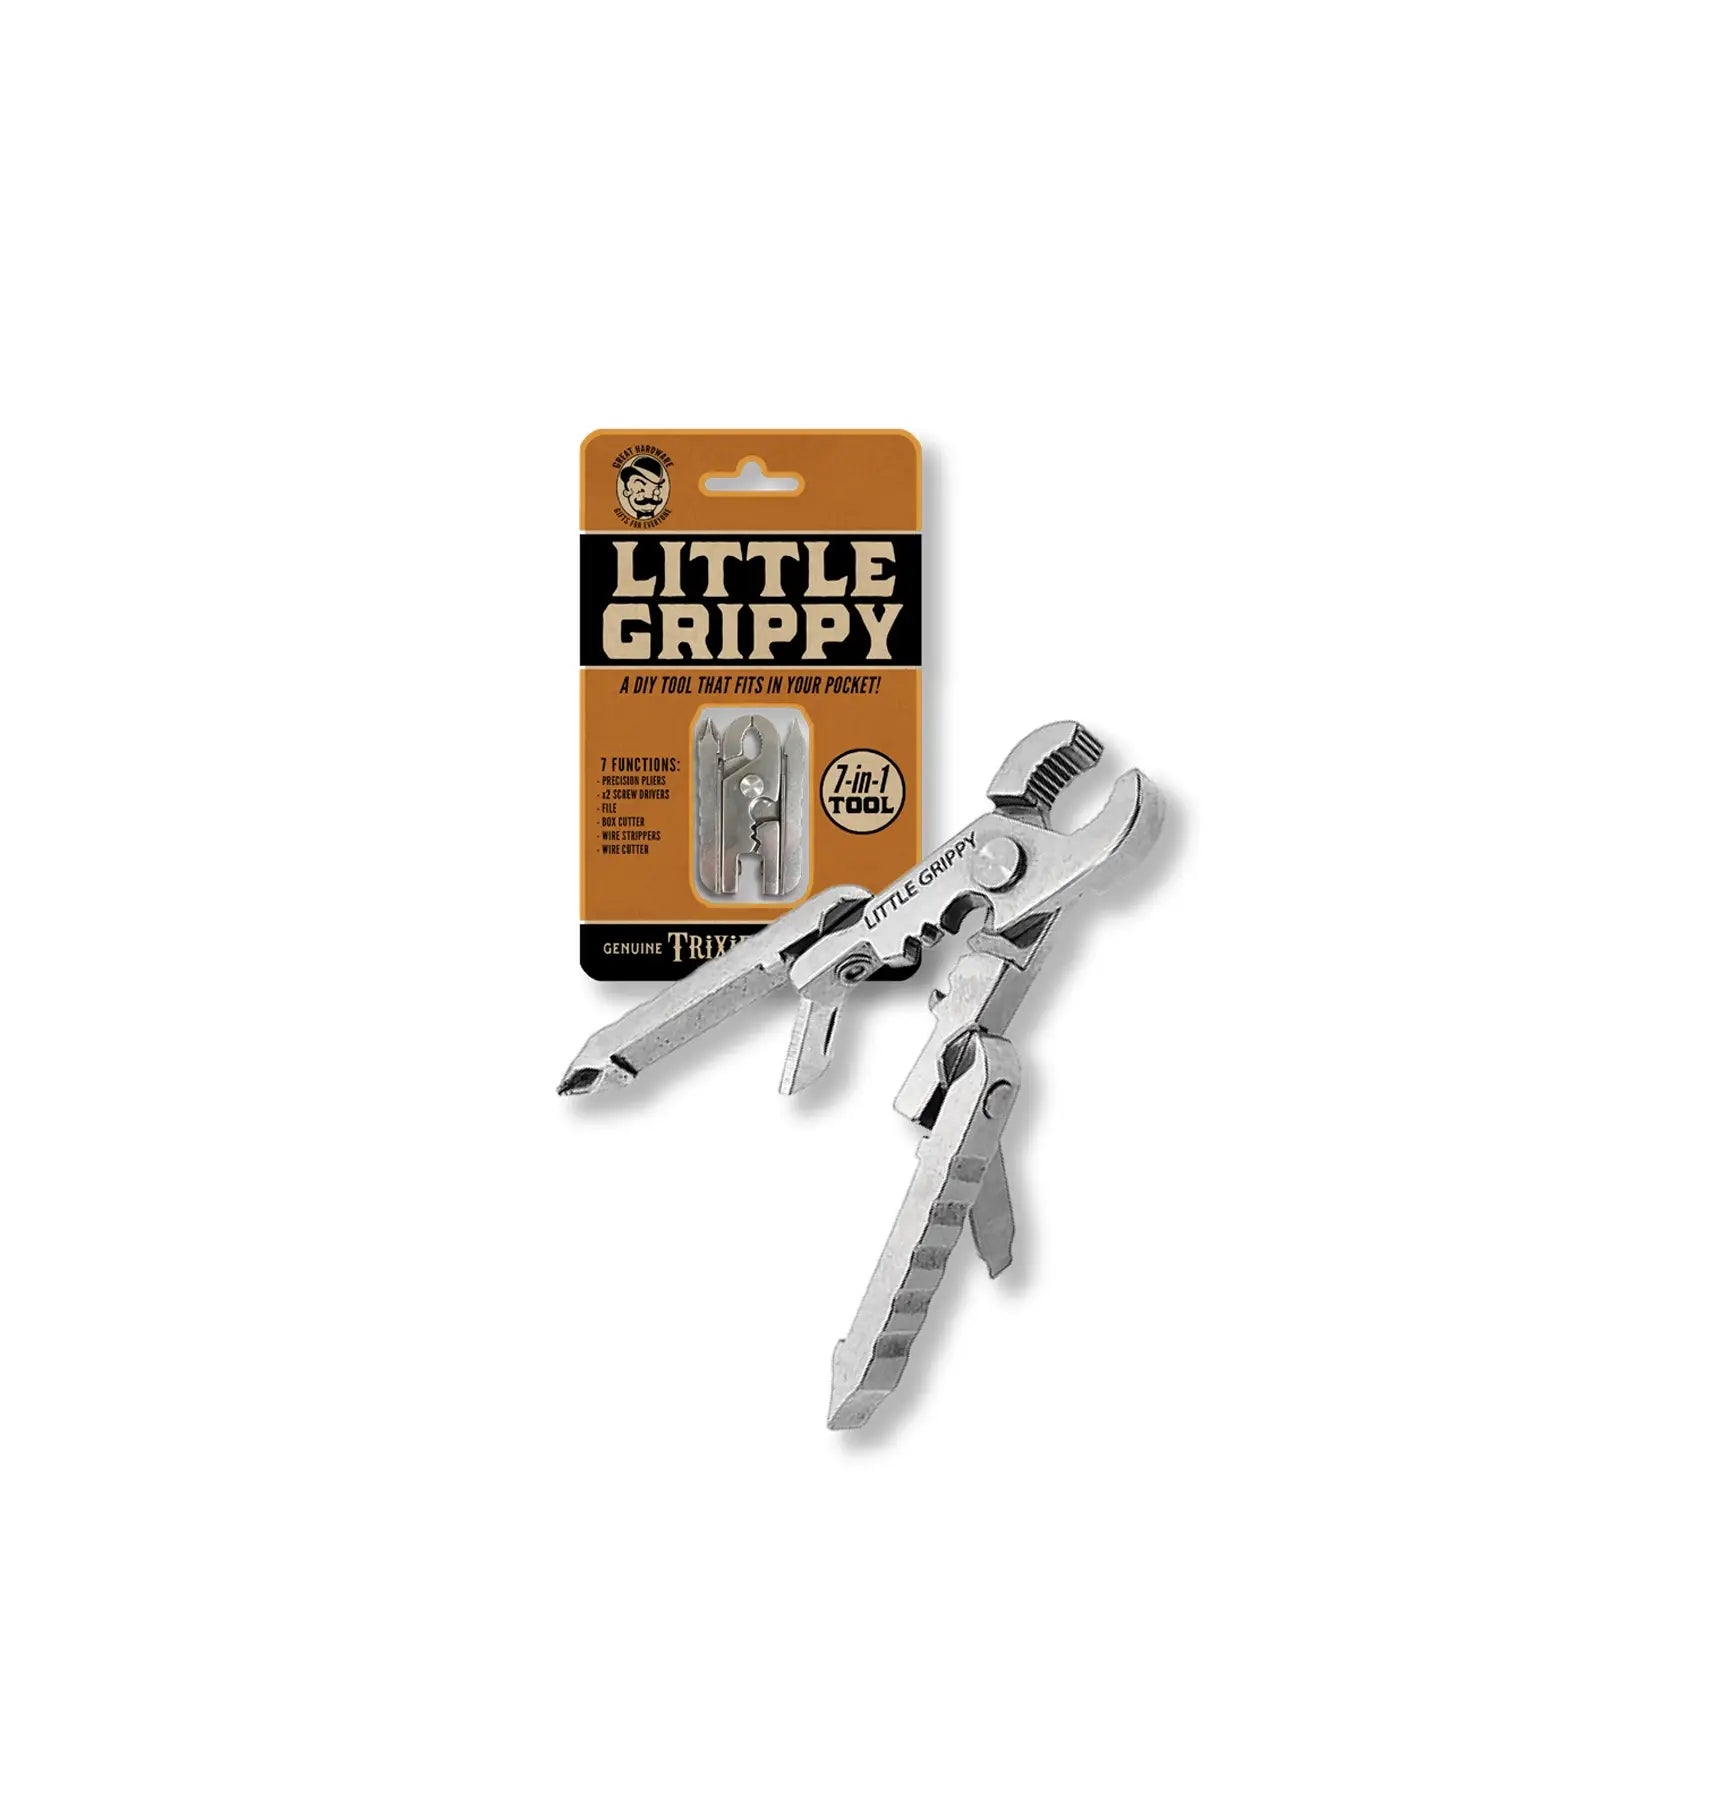 A "Little Grippy Pliers Multi-tool" with precision pliers, screwdrivers, and other tools, still attached to its retail packaging.